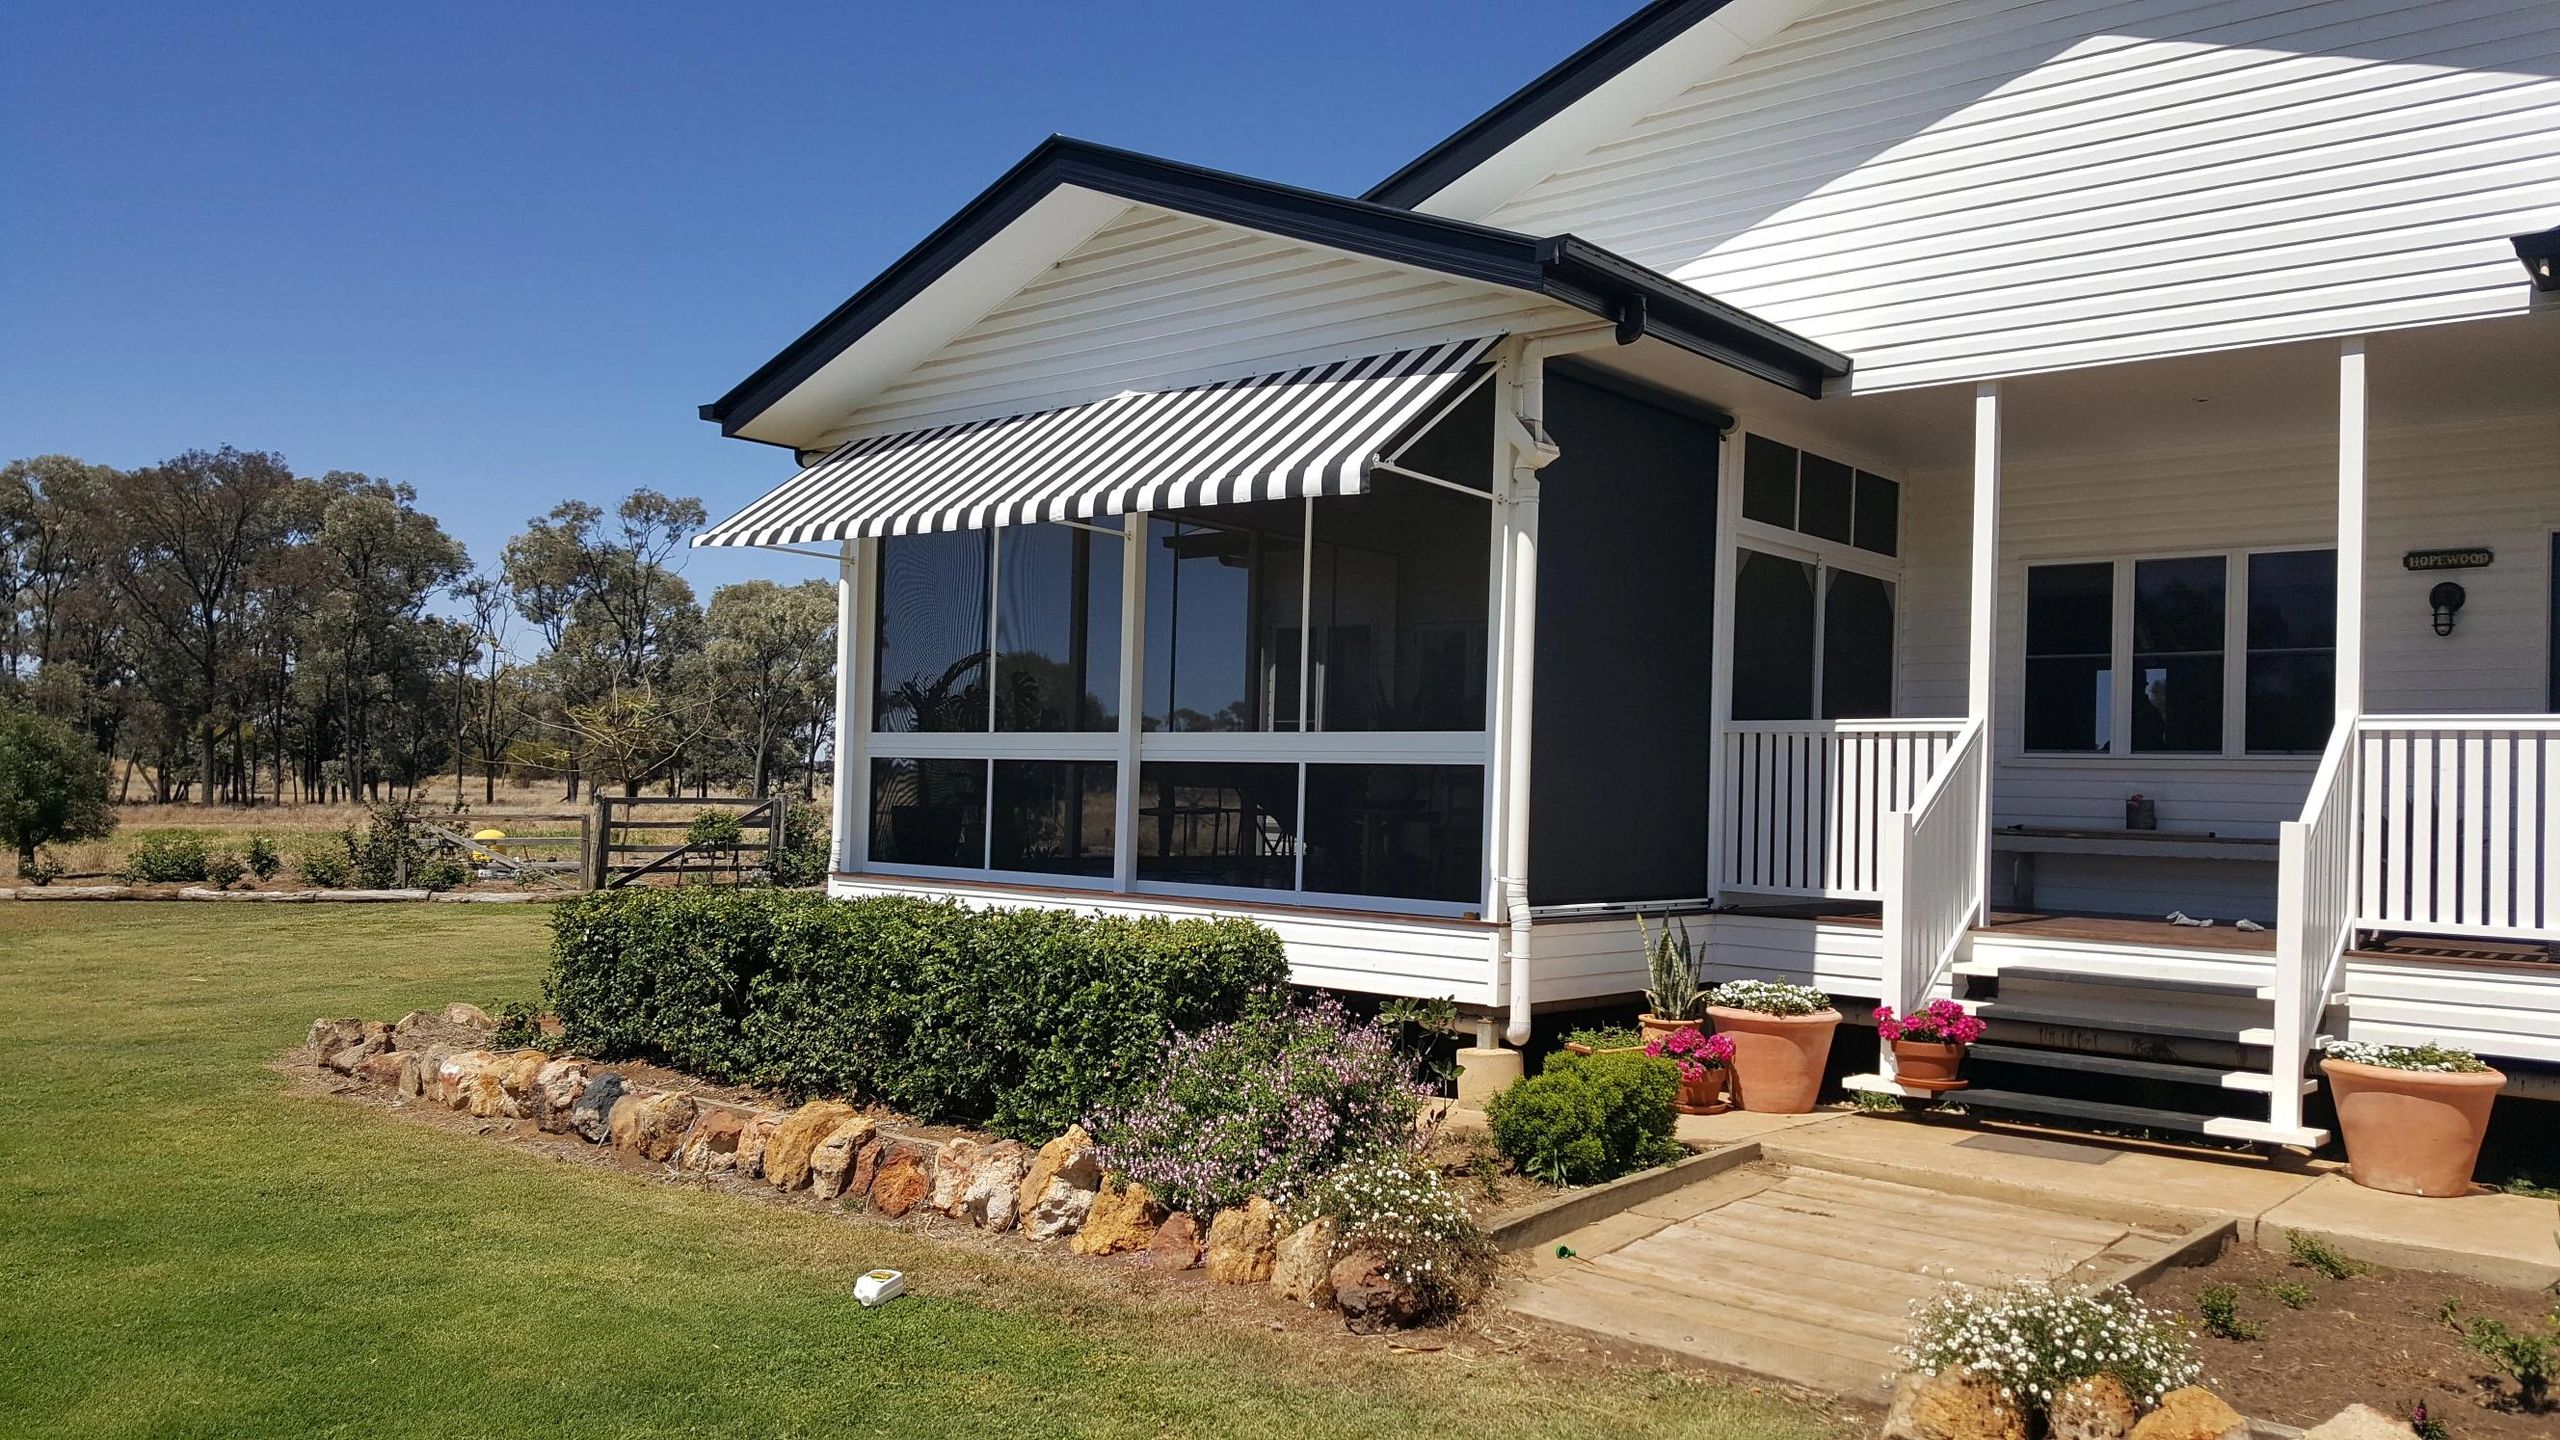 Sunset Canvas - Fixed Frame Awnings, External Blinds and Awnings